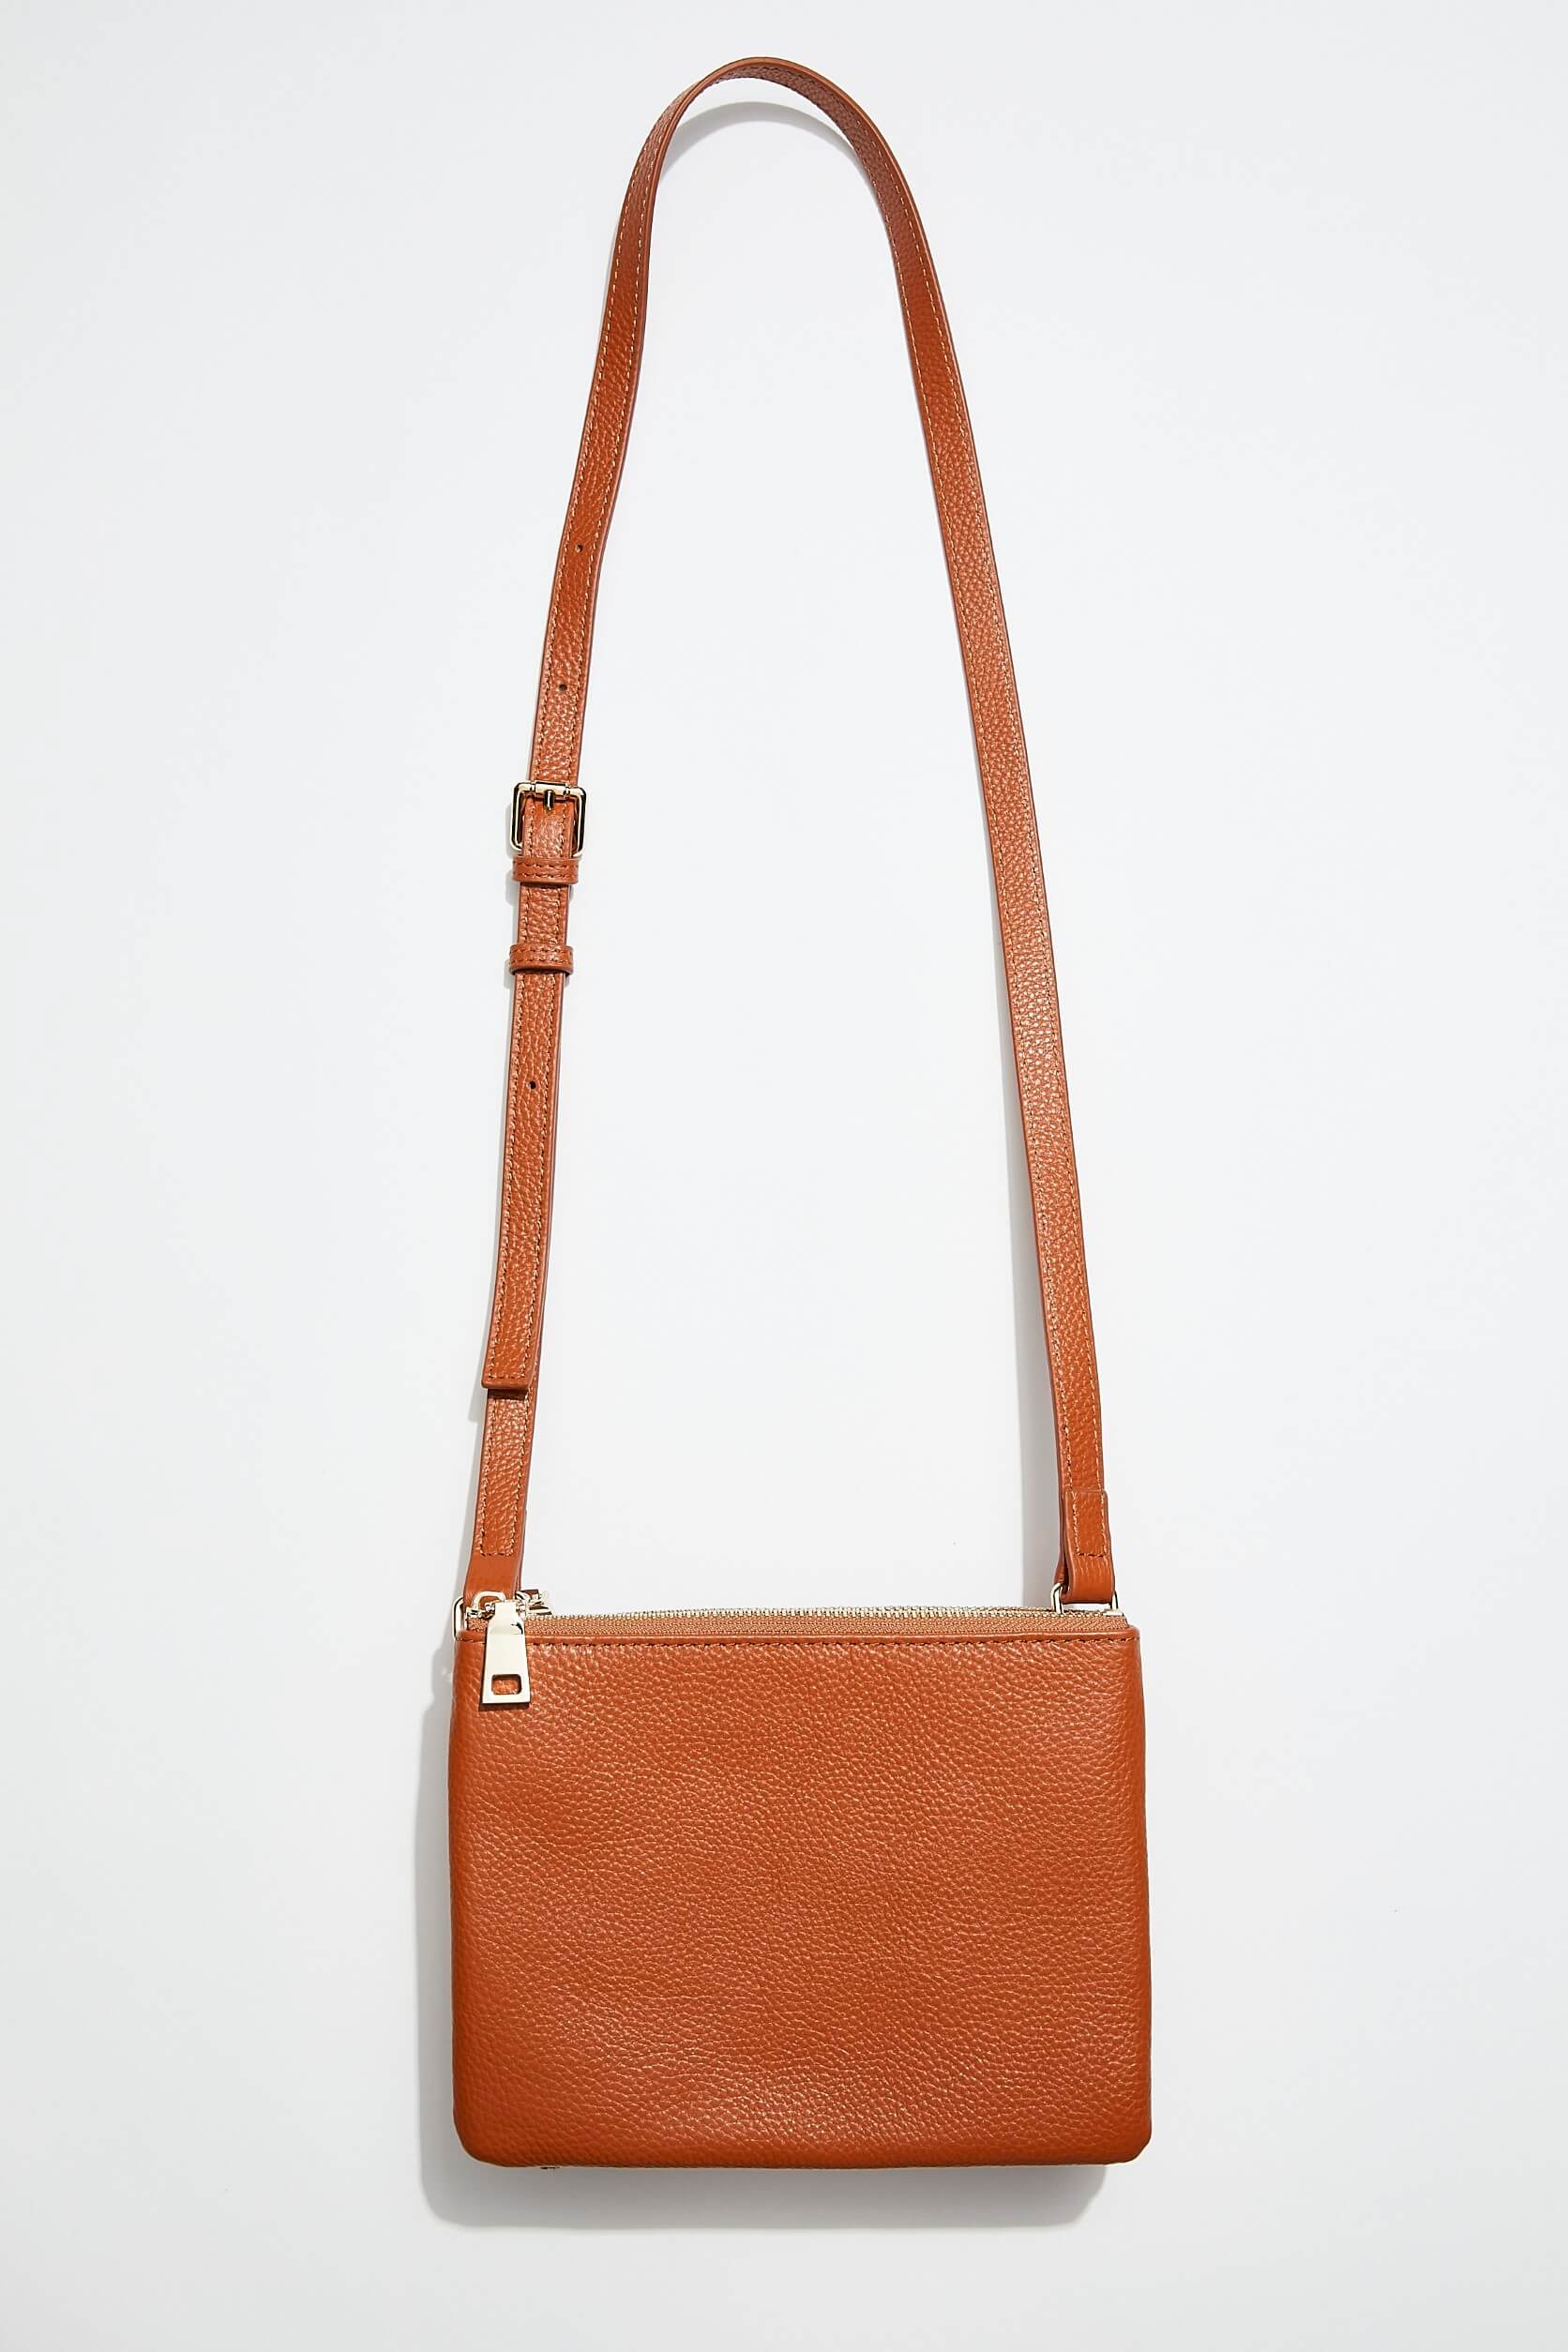 front view of mon purses' double pouch bag in camel pebbled leather with gold hardware with long shoulder strap showing interior of one of the pouches